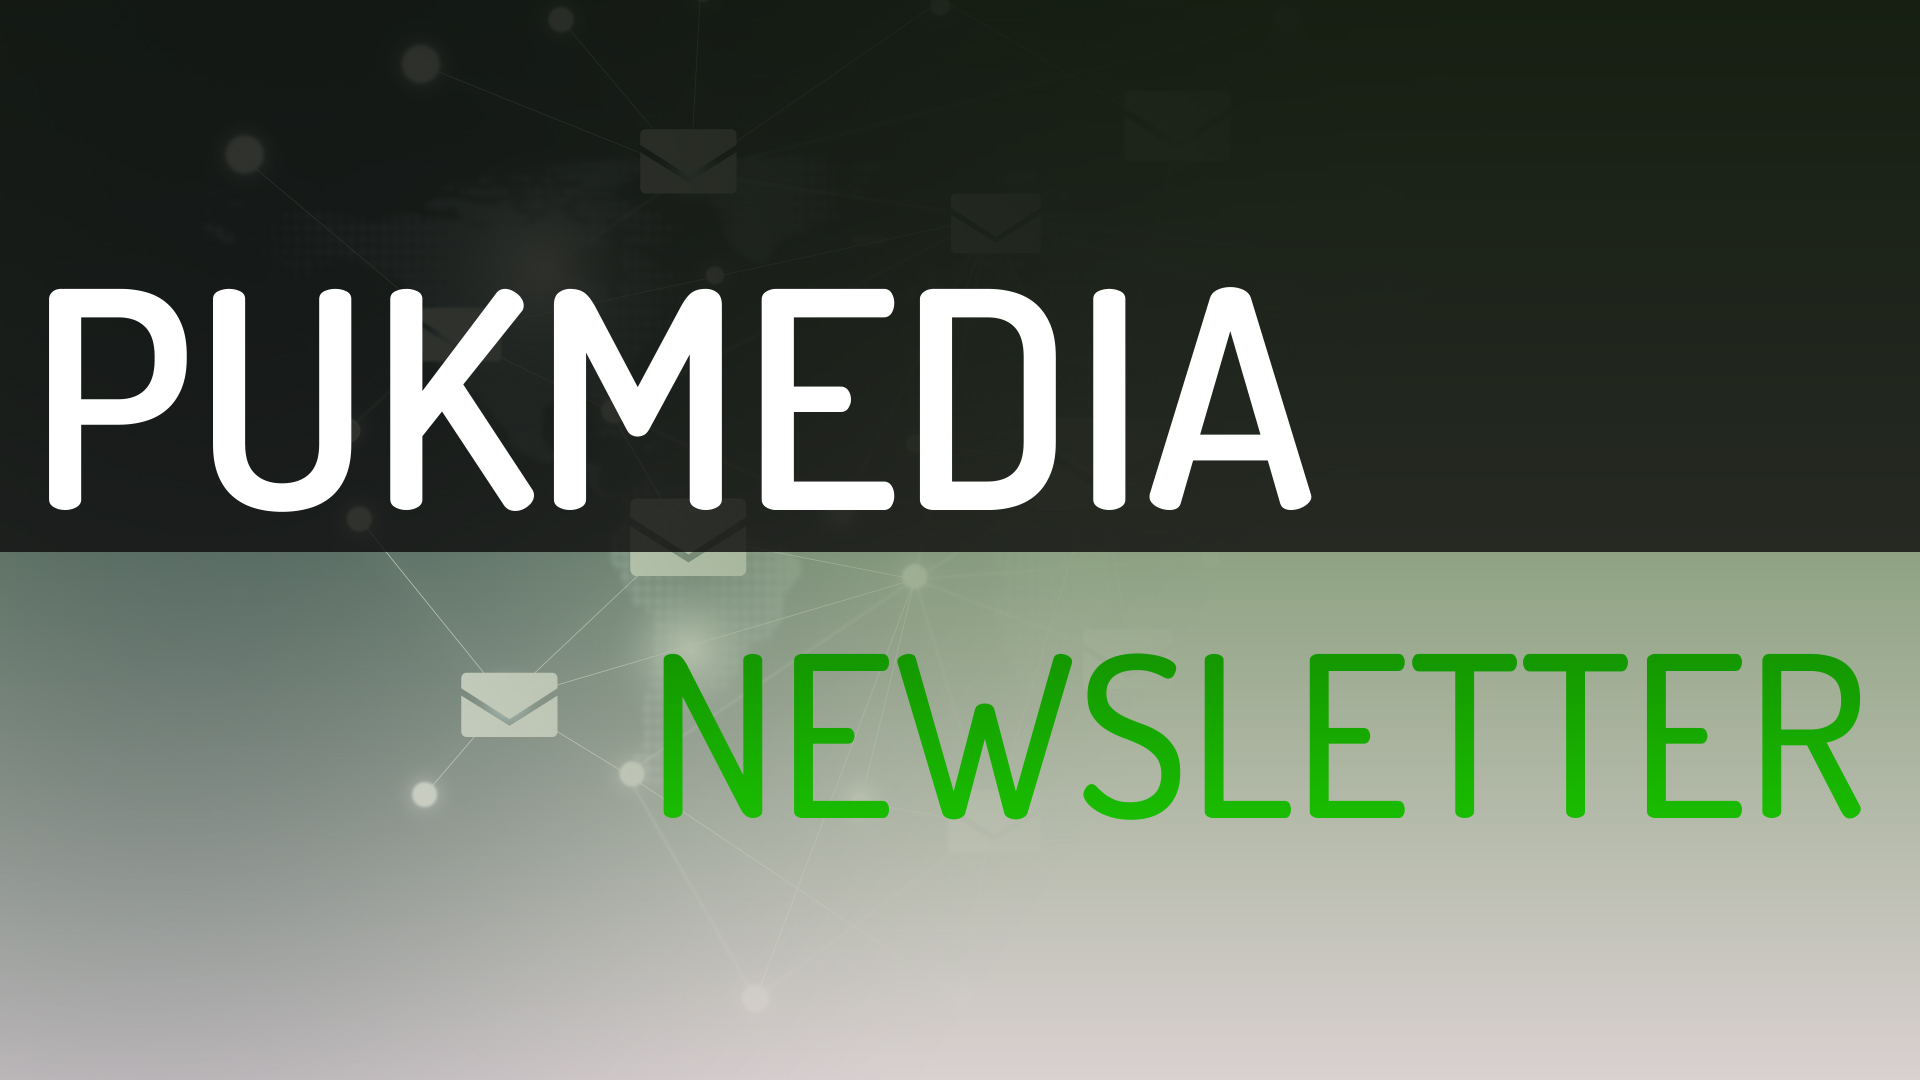   For the first time: PUKMEDIA English publishes weekly newsletters